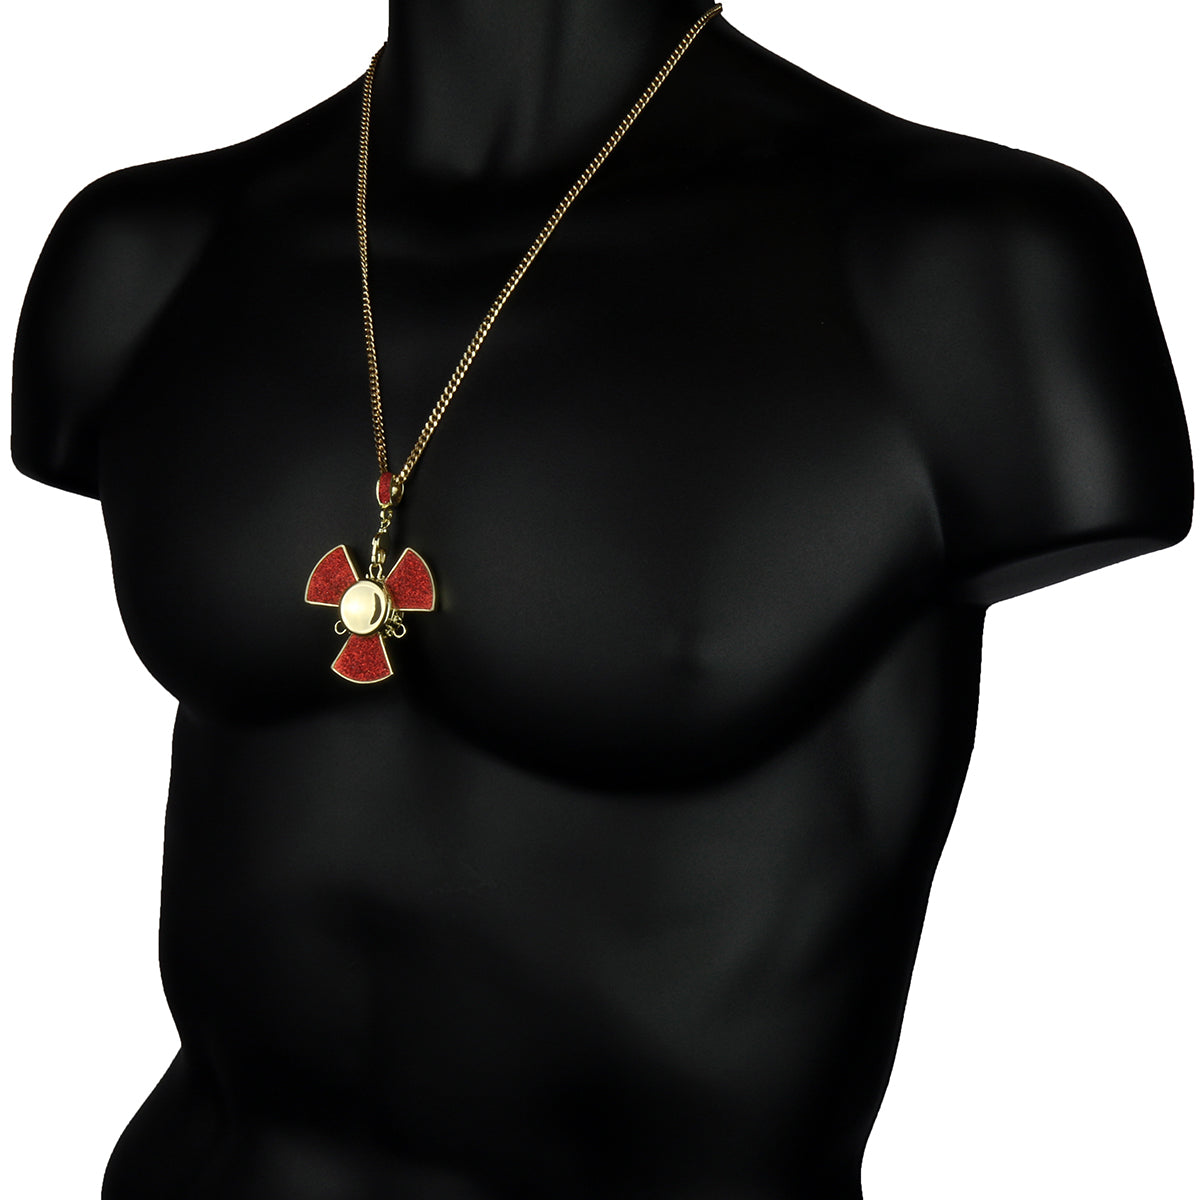 14k Gold/Red Plated Fidget Spinner Pendant with 24" Cuban Chain